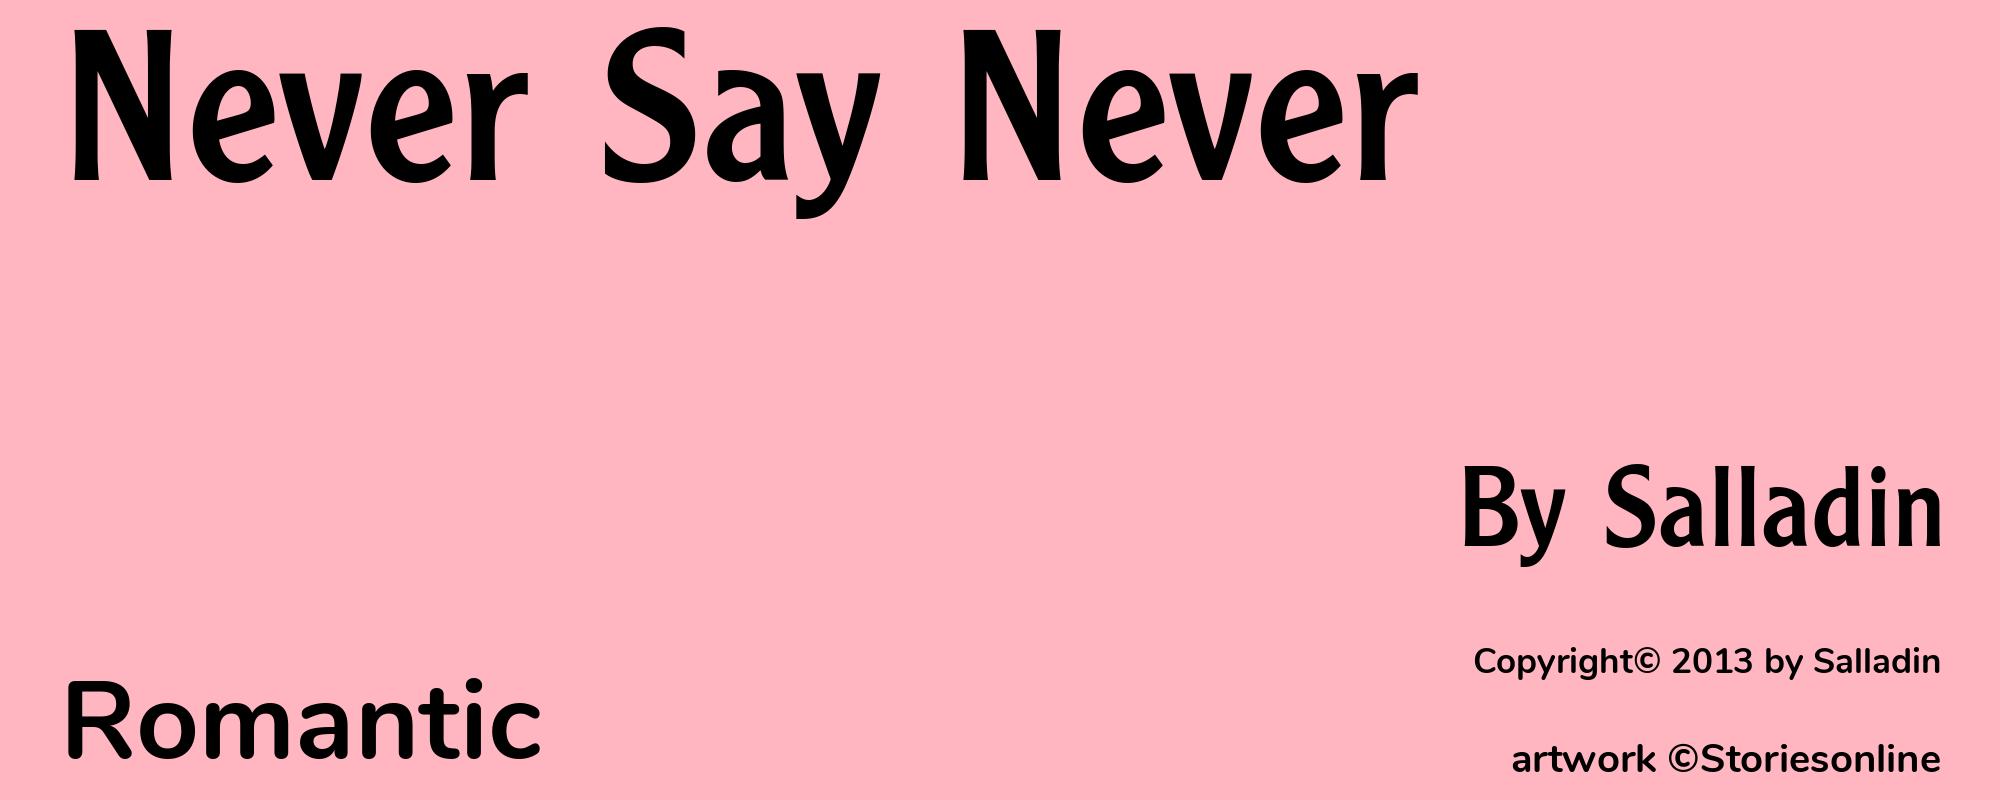 Never Say Never - Cover